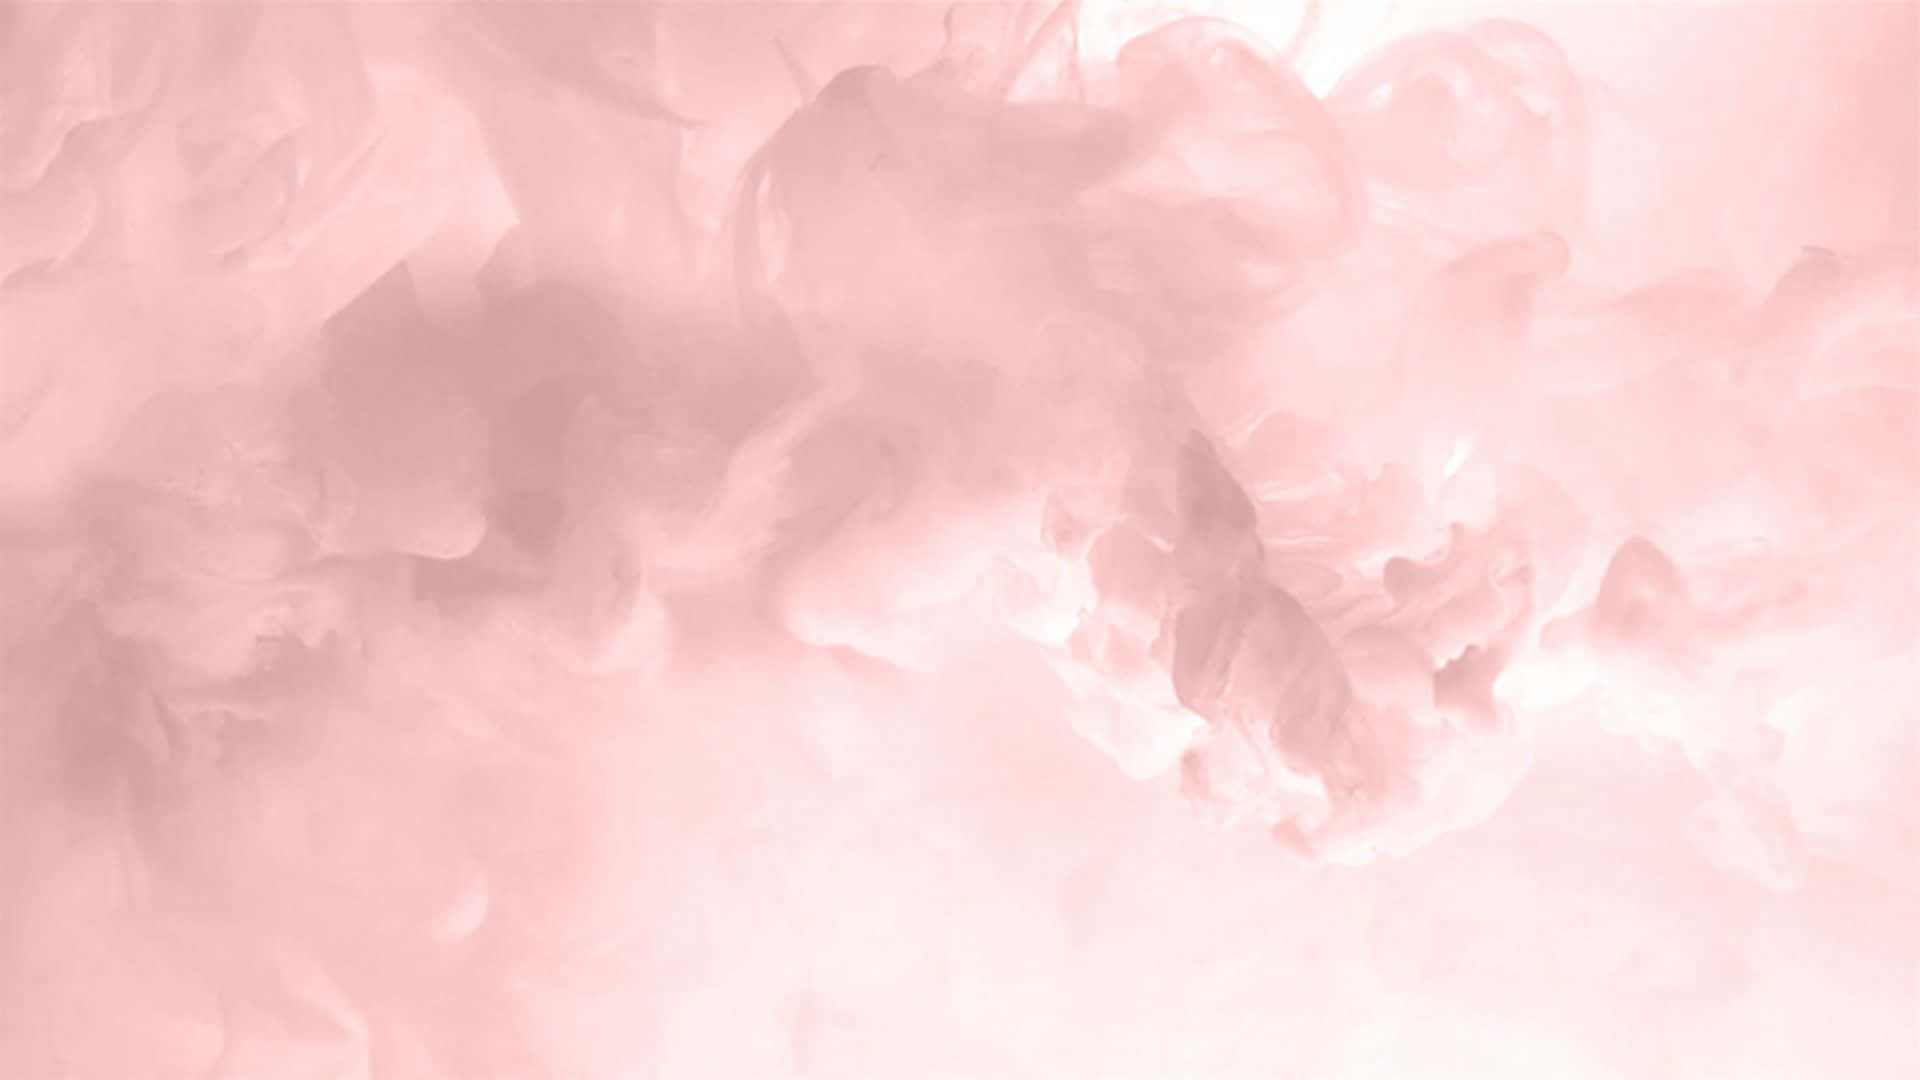 100+] Solid Pink Backgrounds